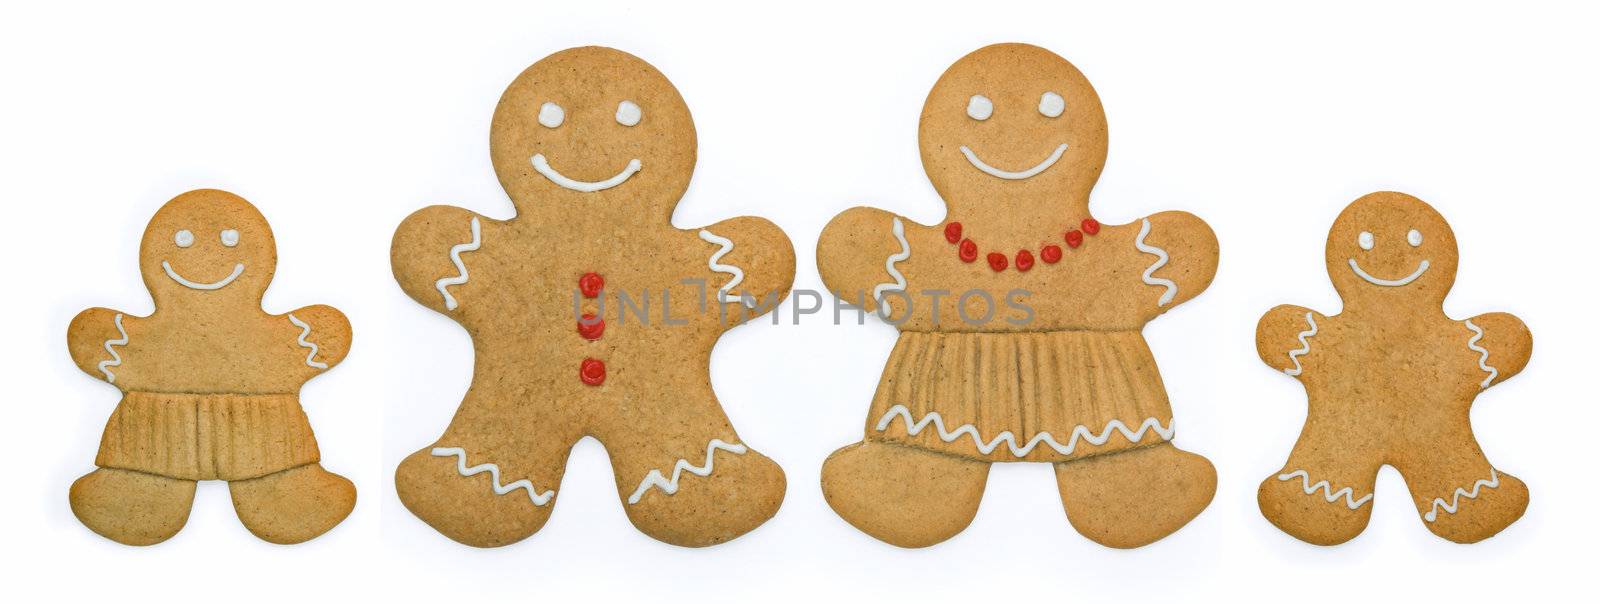 Smiling gingerbread family stand in a row